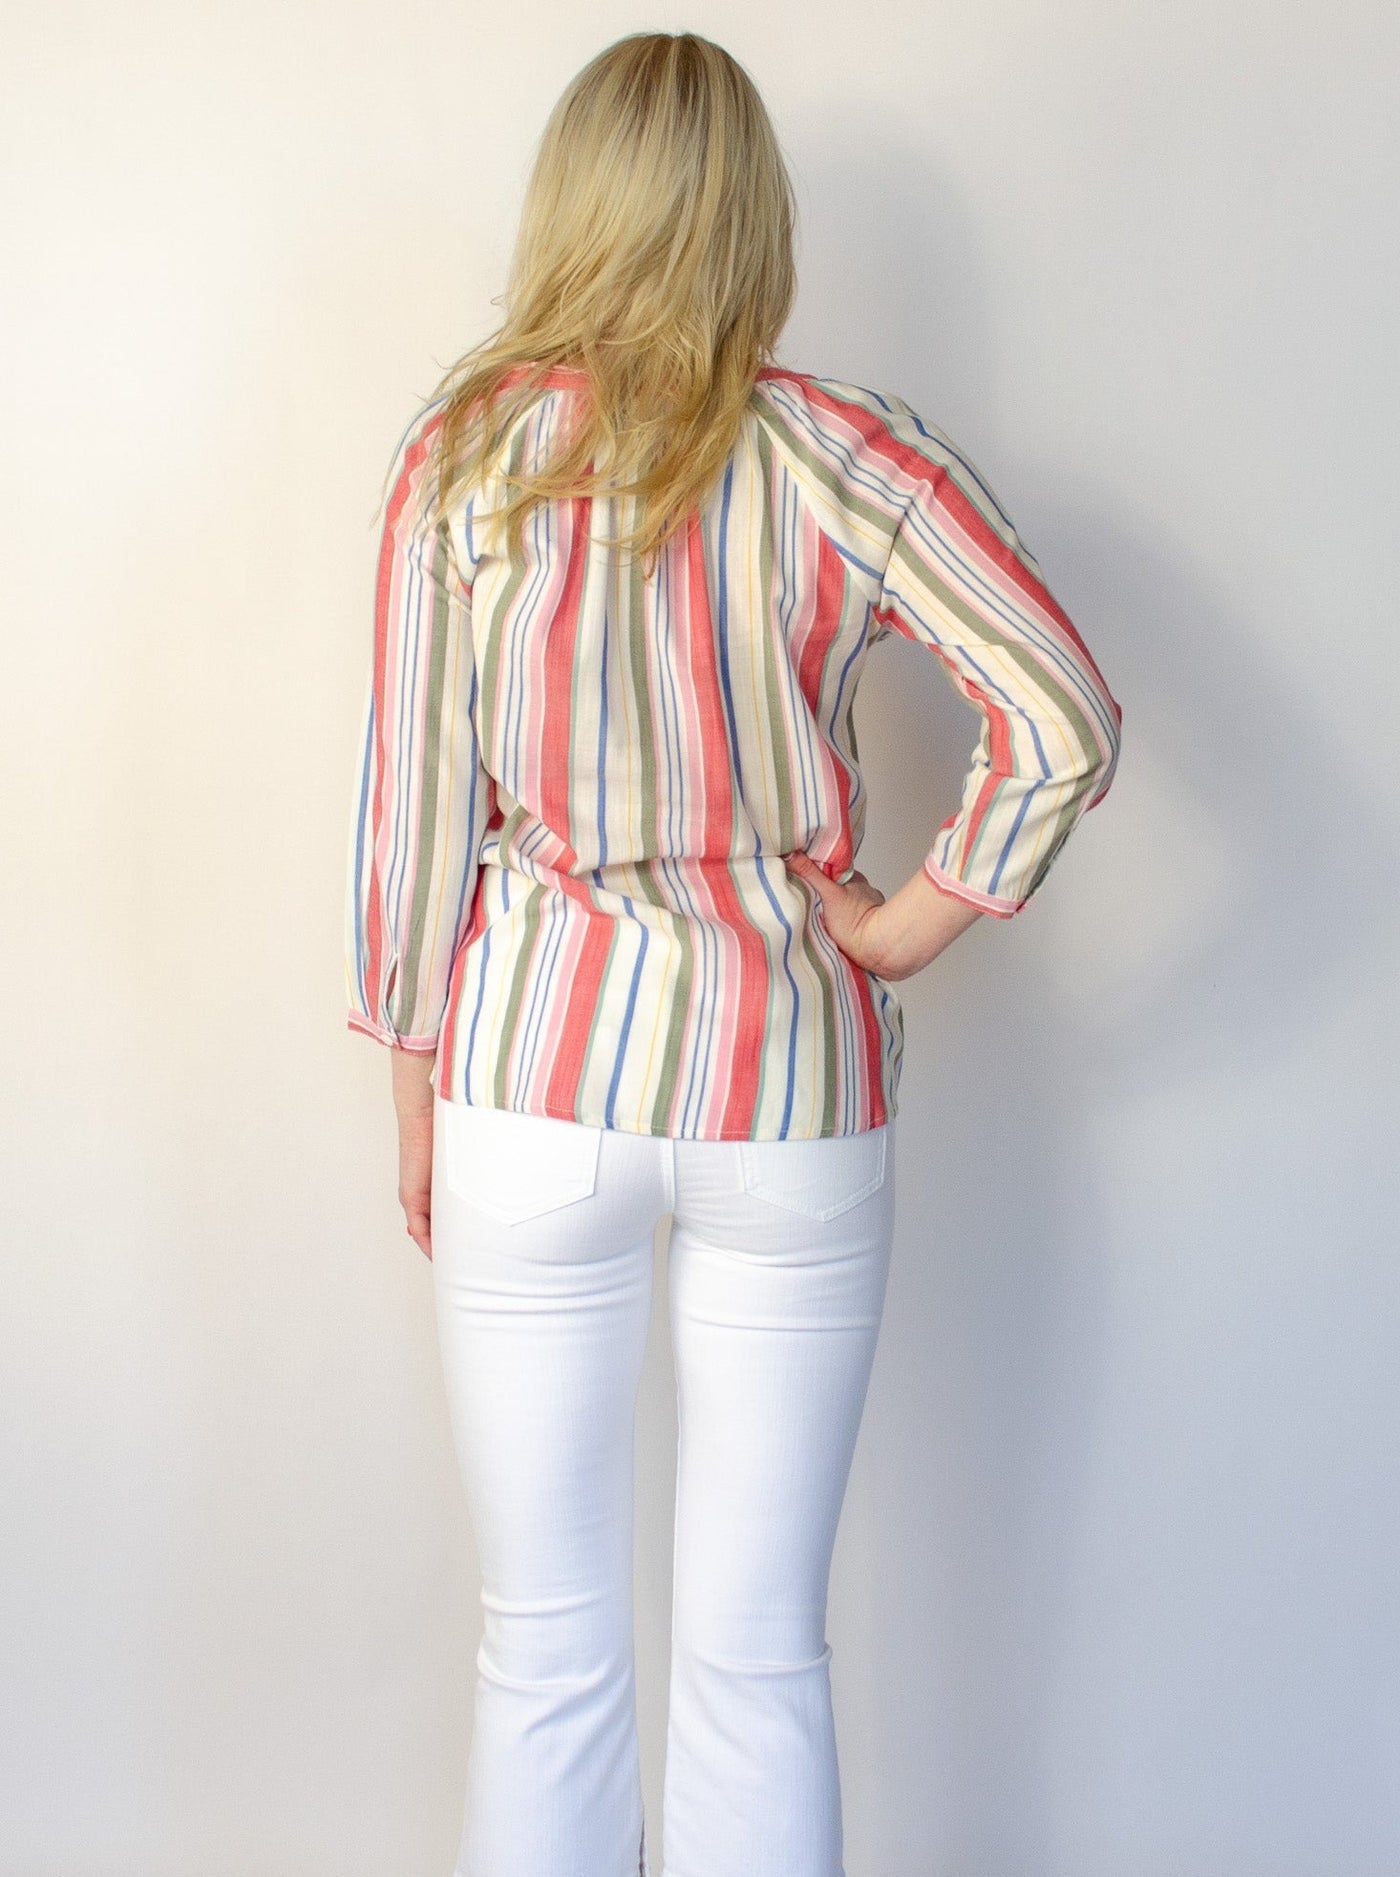 Model is wearing a vertical multi colored striped v-neck long sleeve blouse.